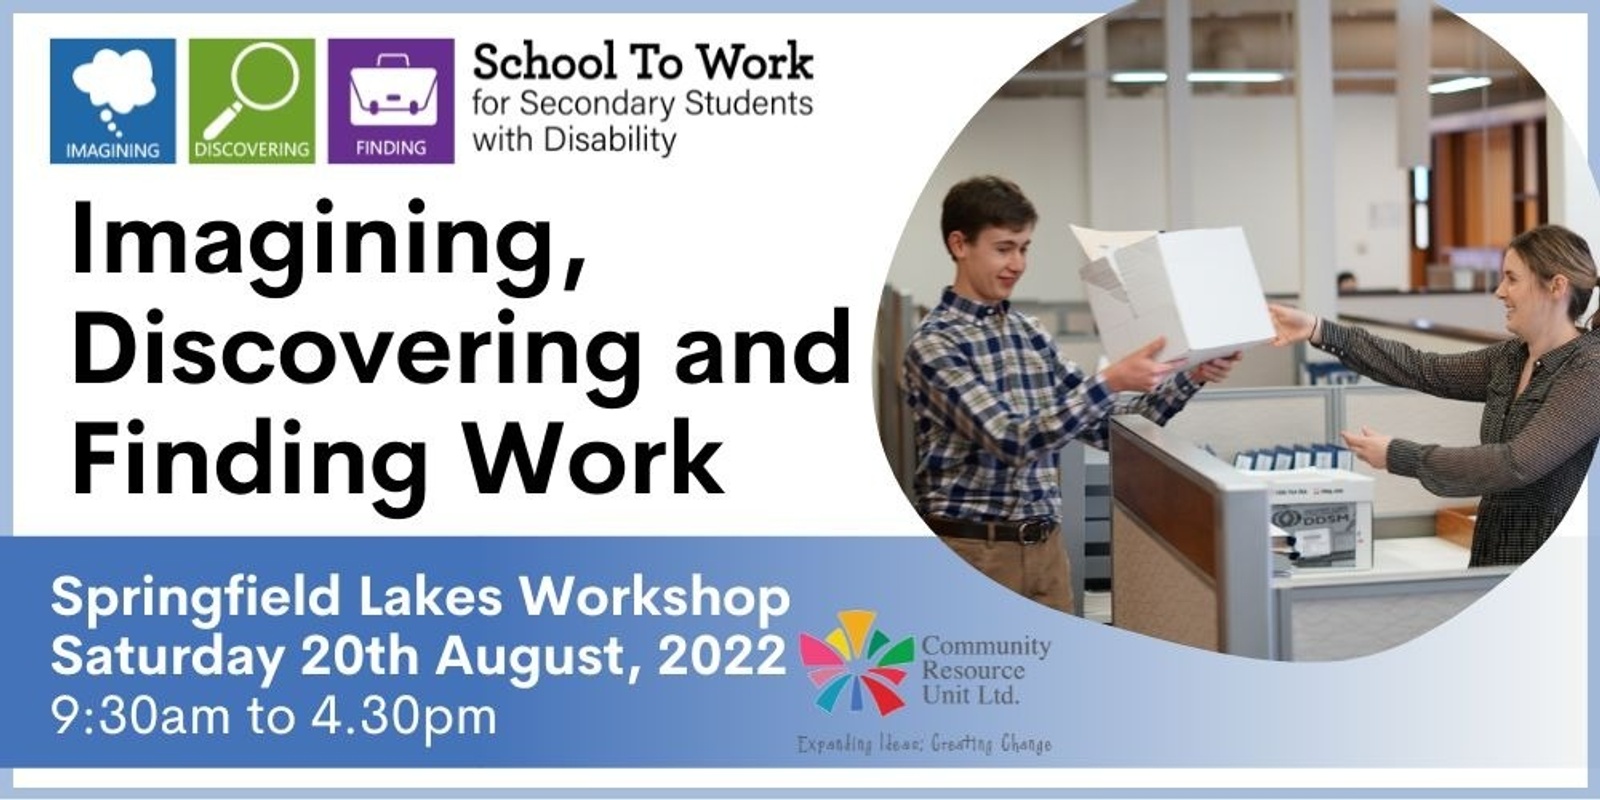 Springfield Lakes Workshop: Imagining, Discovering and Finding Work